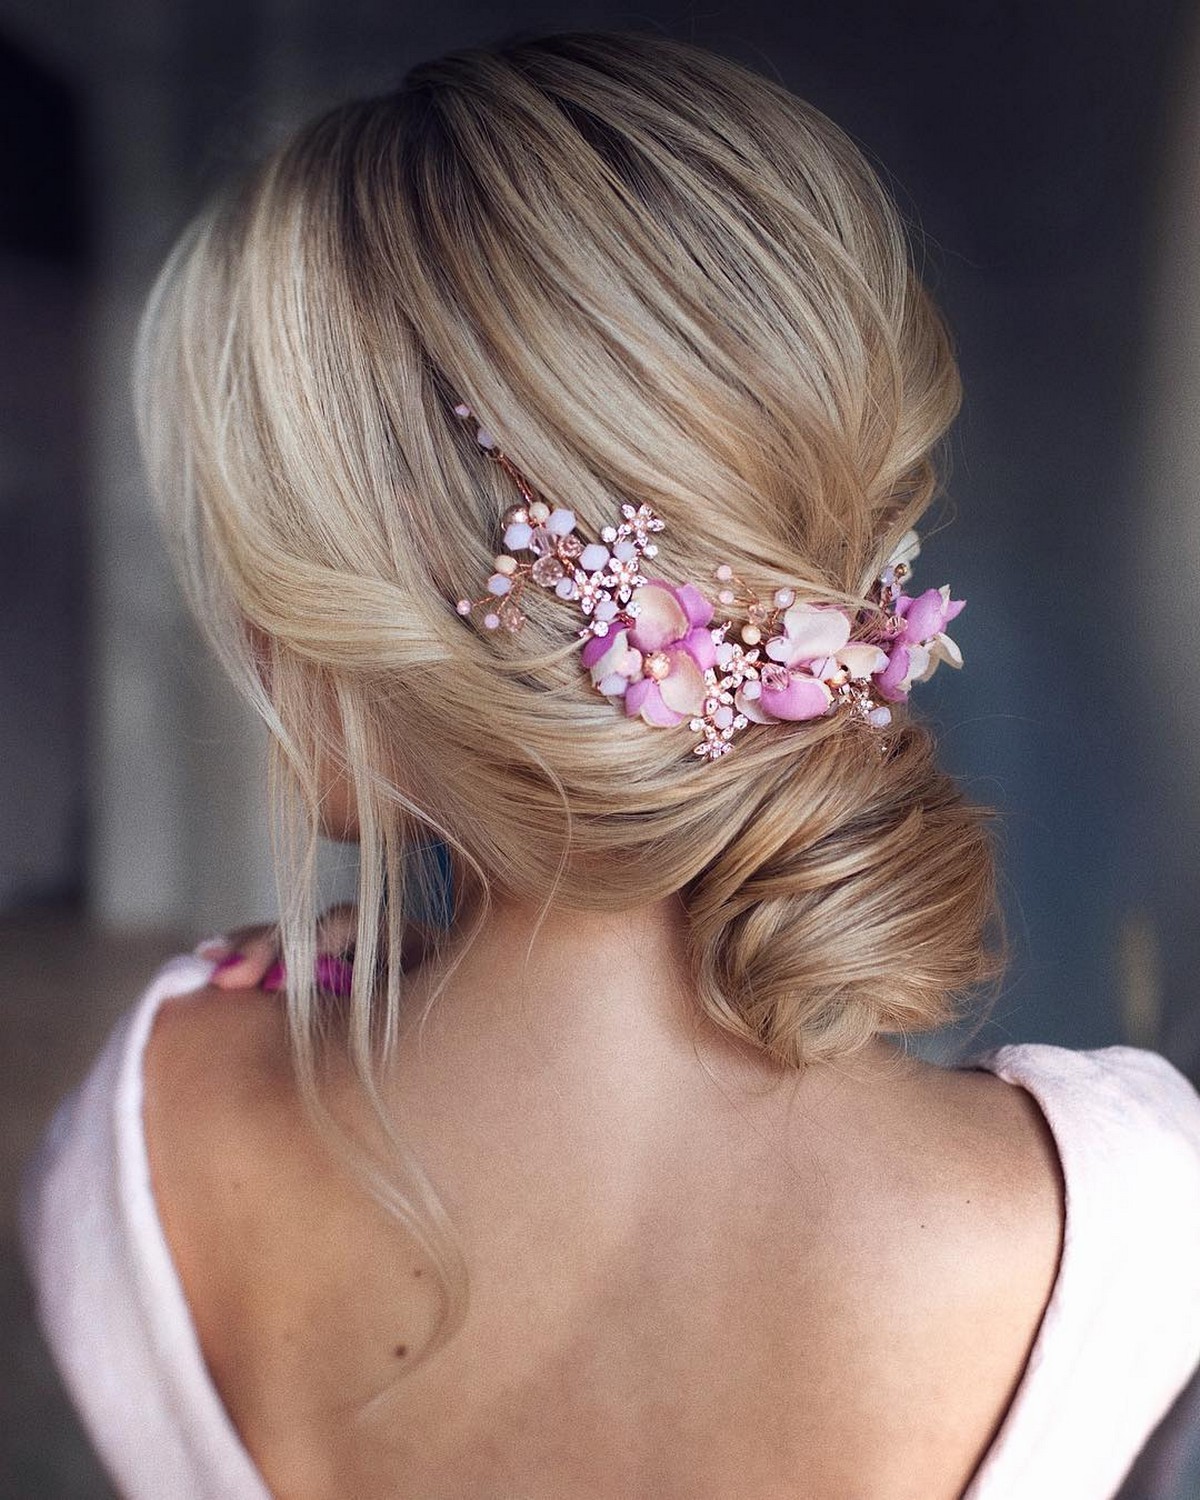 Chignon With A Floral Headpiece